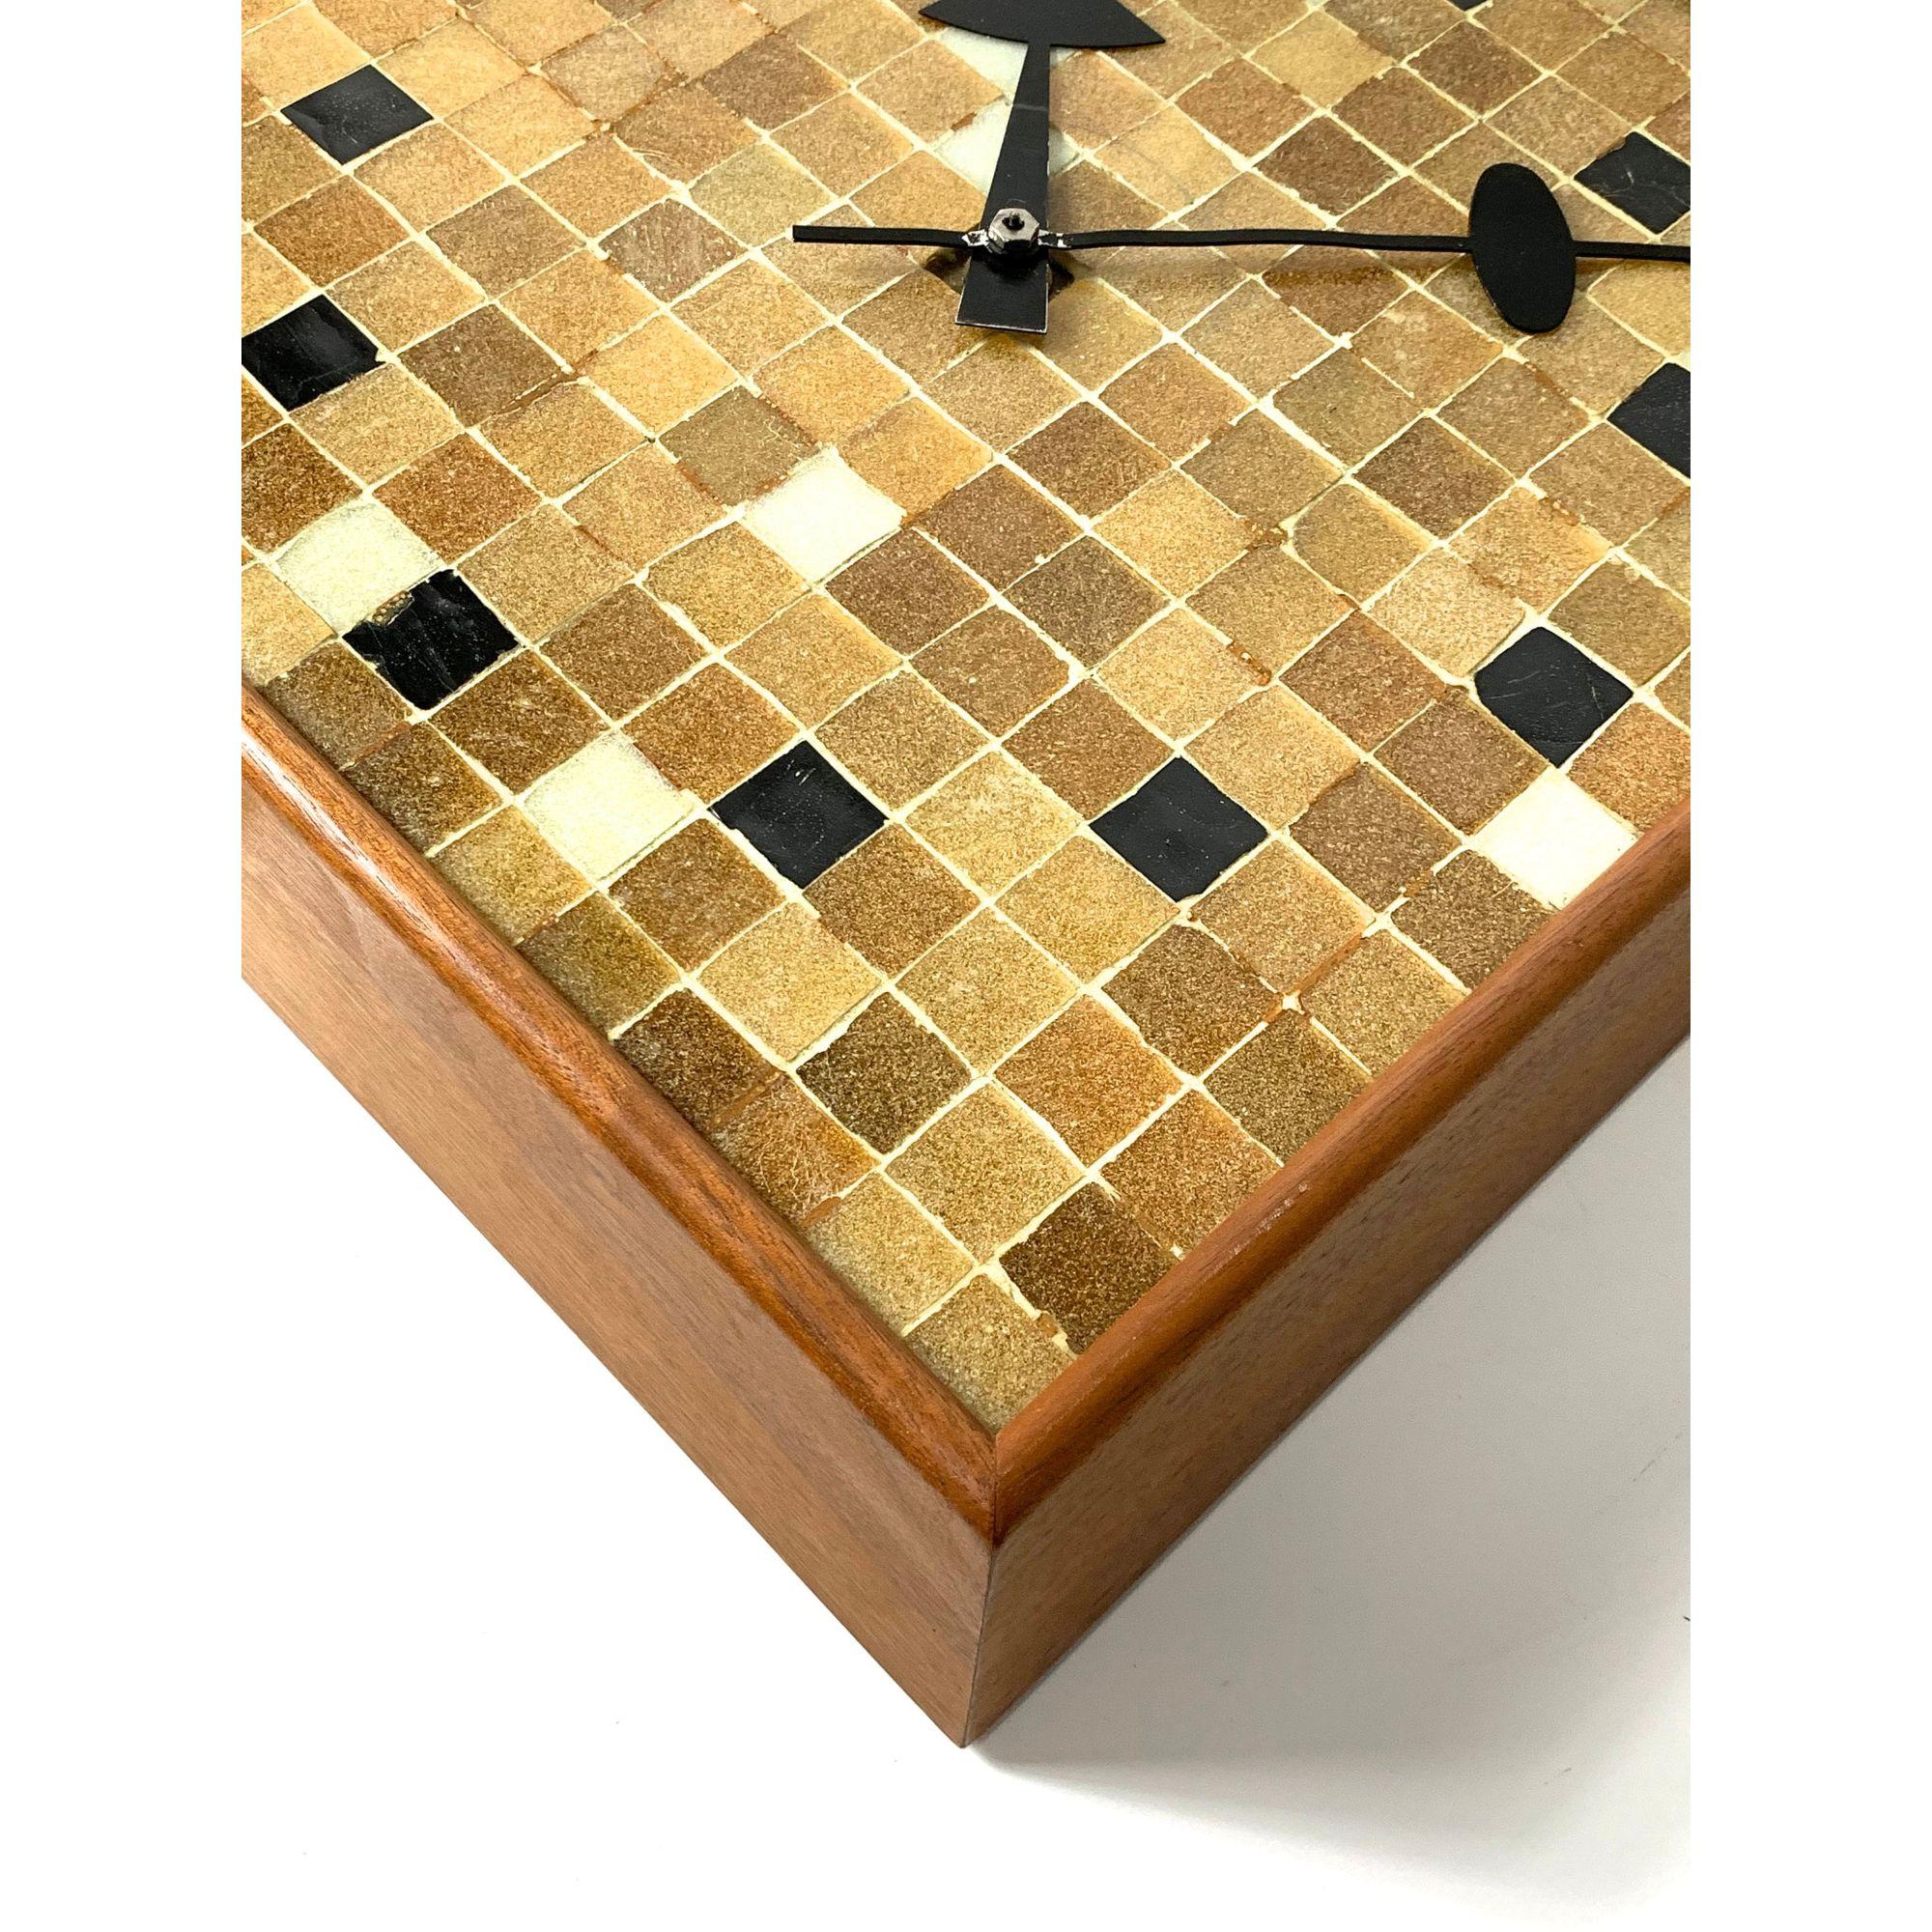 Rare Mosaic Tile Wall Clock in Walnut by George Nelson & Assoc circa 1950s In Good Condition For Sale In Troy, MI